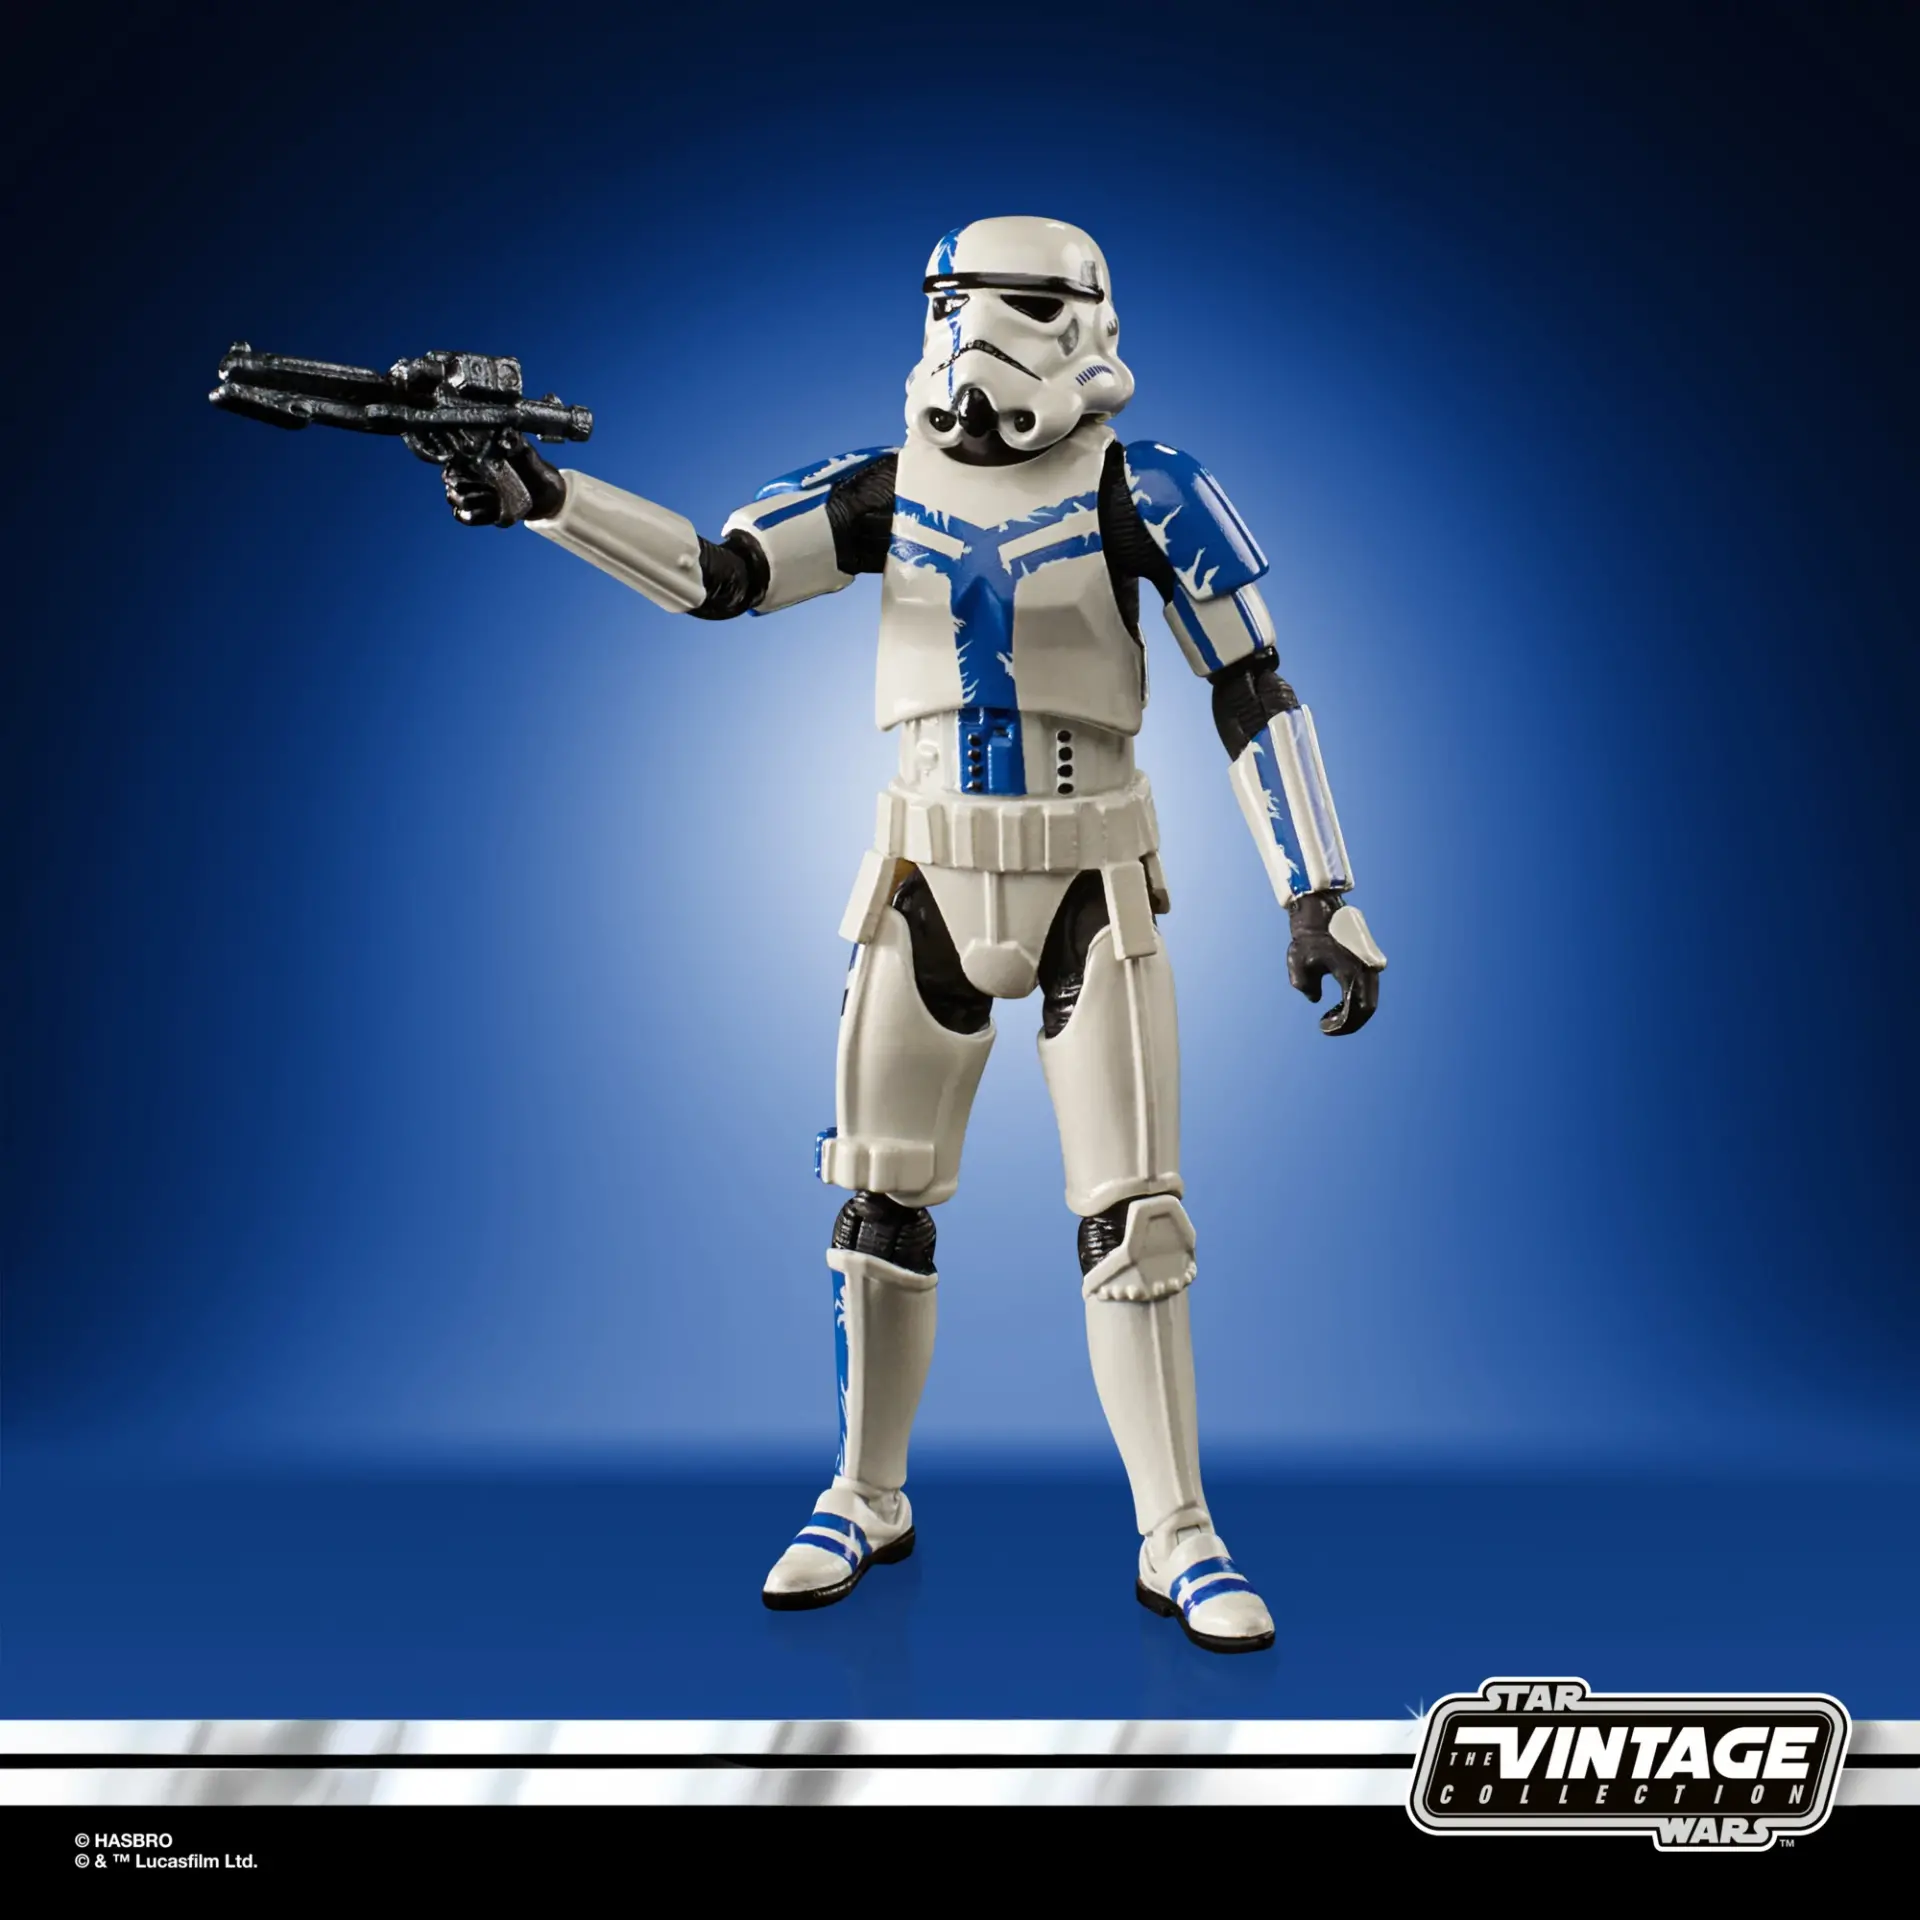 Star wars the vintage collection gaming greats stormtrooper commander jawascave